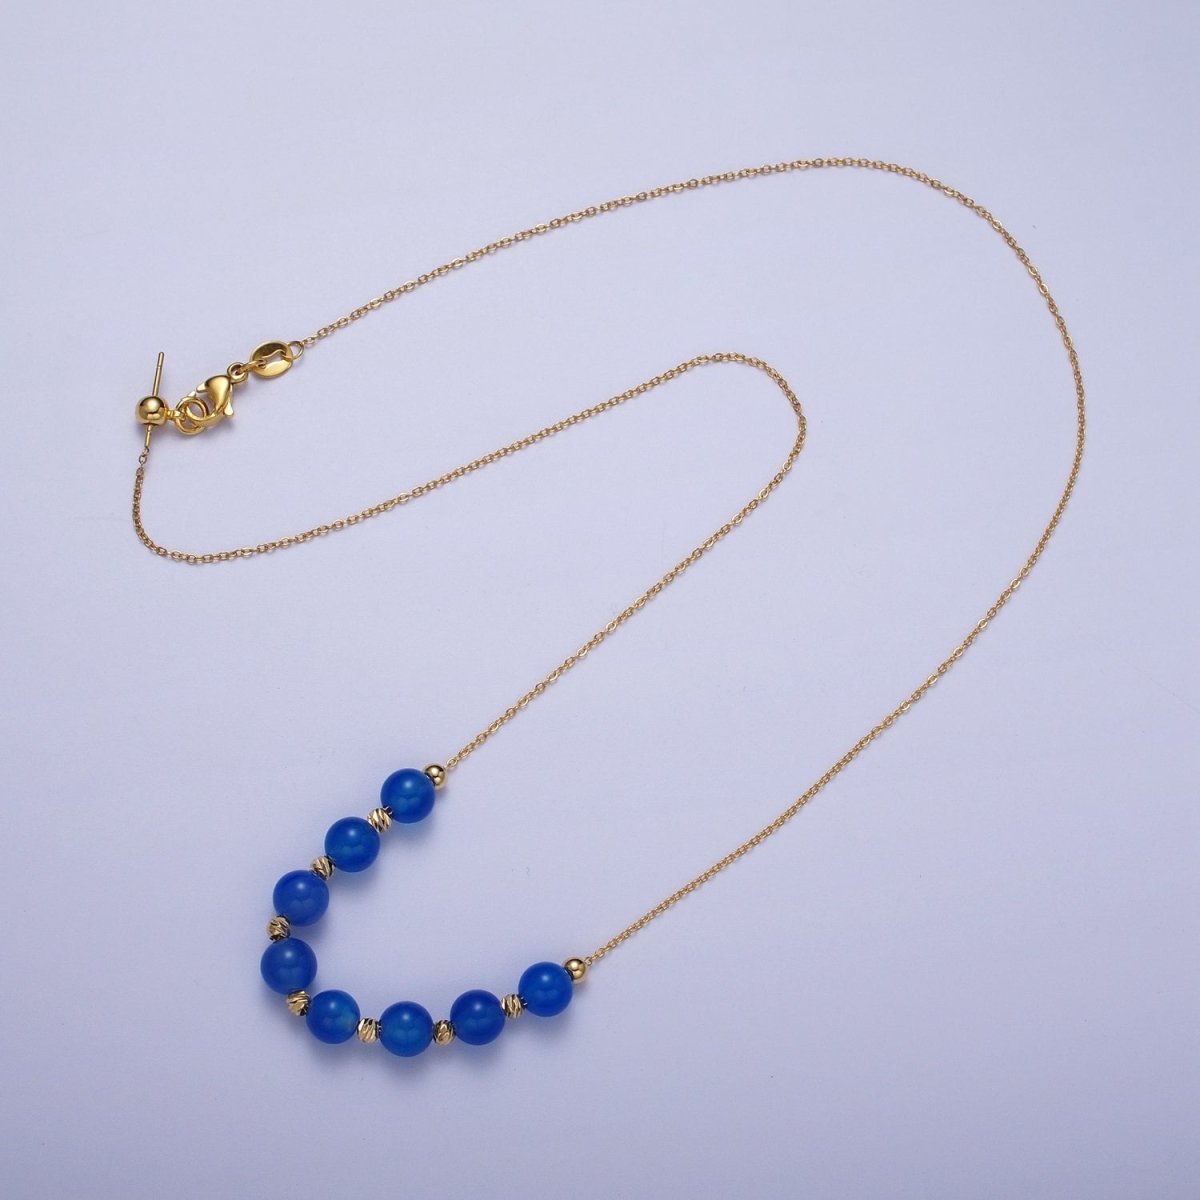 24K Gold Filled 6mm Natural Gemstone Beads 18.5 Inch Chain Necklace | WA-1245 - WA-1256 Clearance Pricing - DLUXCA